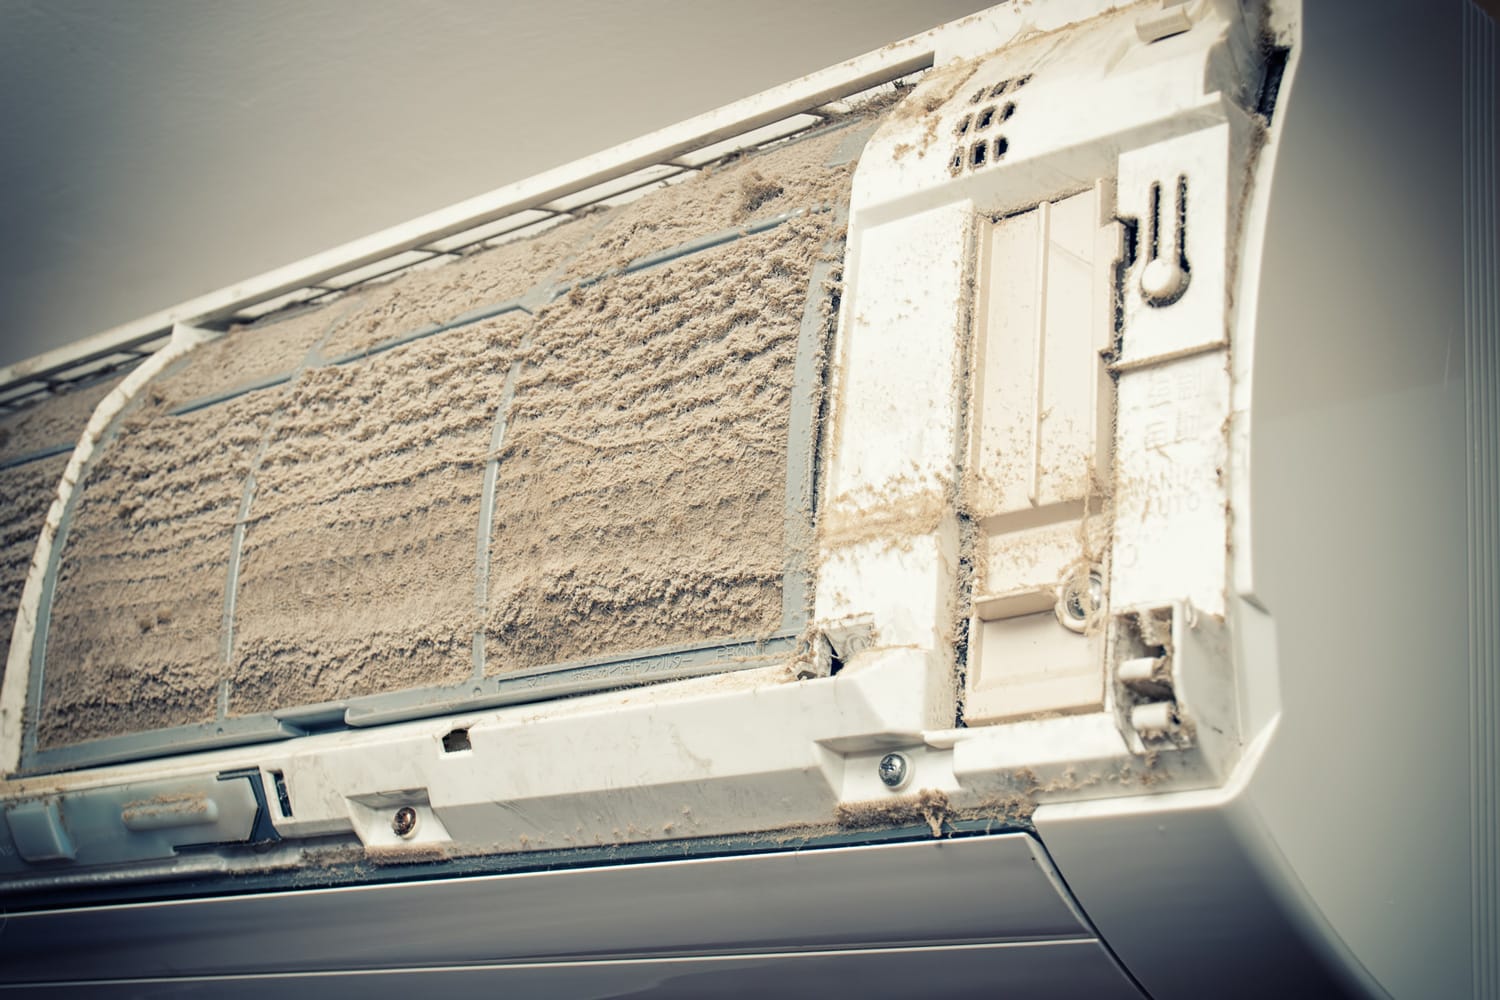 Closeup view of an open Air condition unit and very dirty air filters.